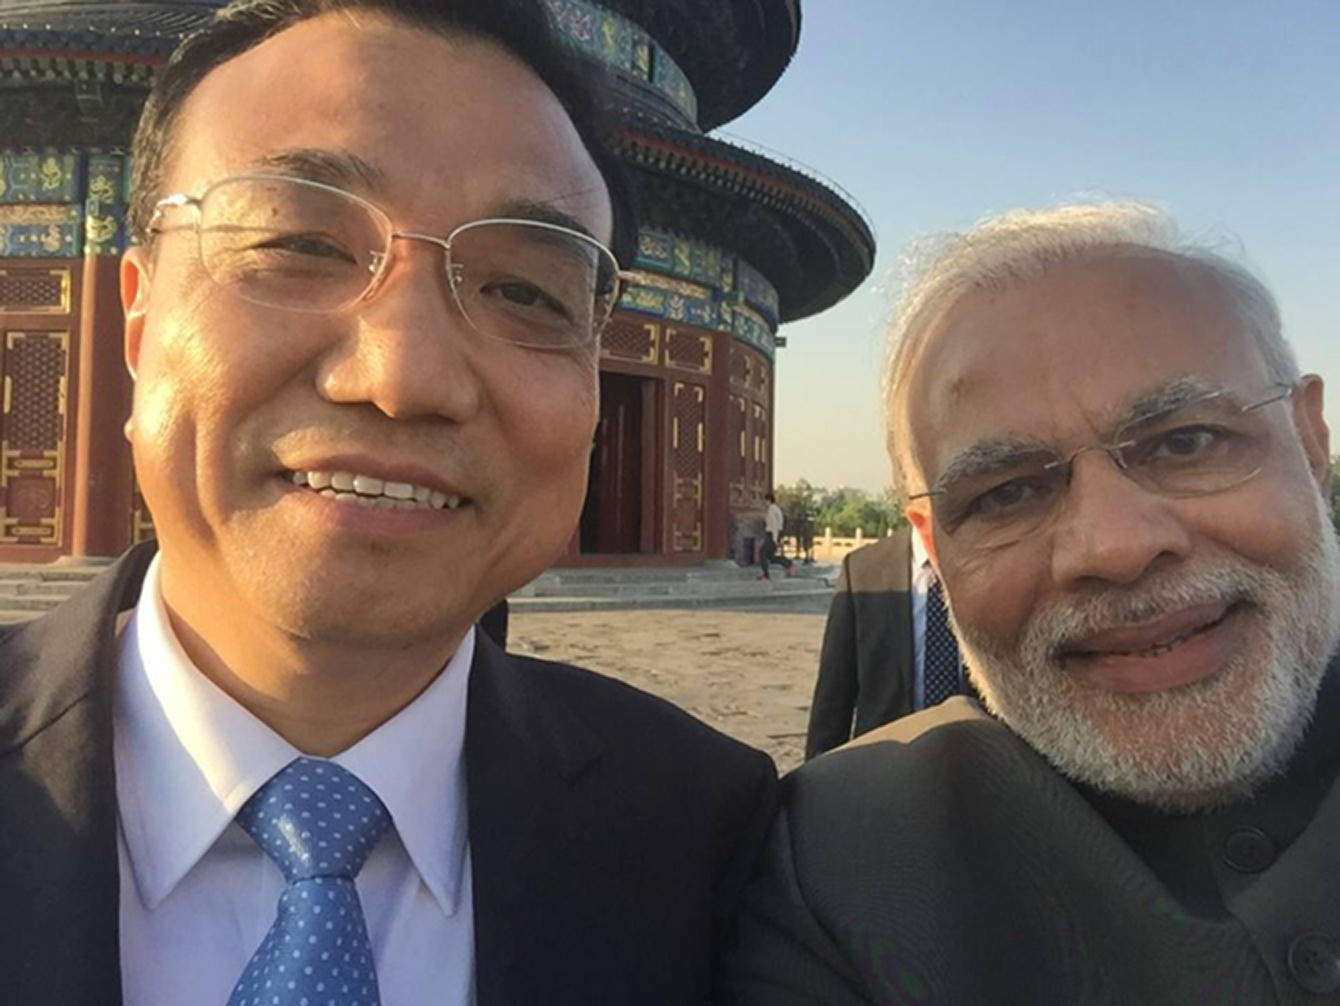 After a hard day's diplomacy, it's time for a selfie.